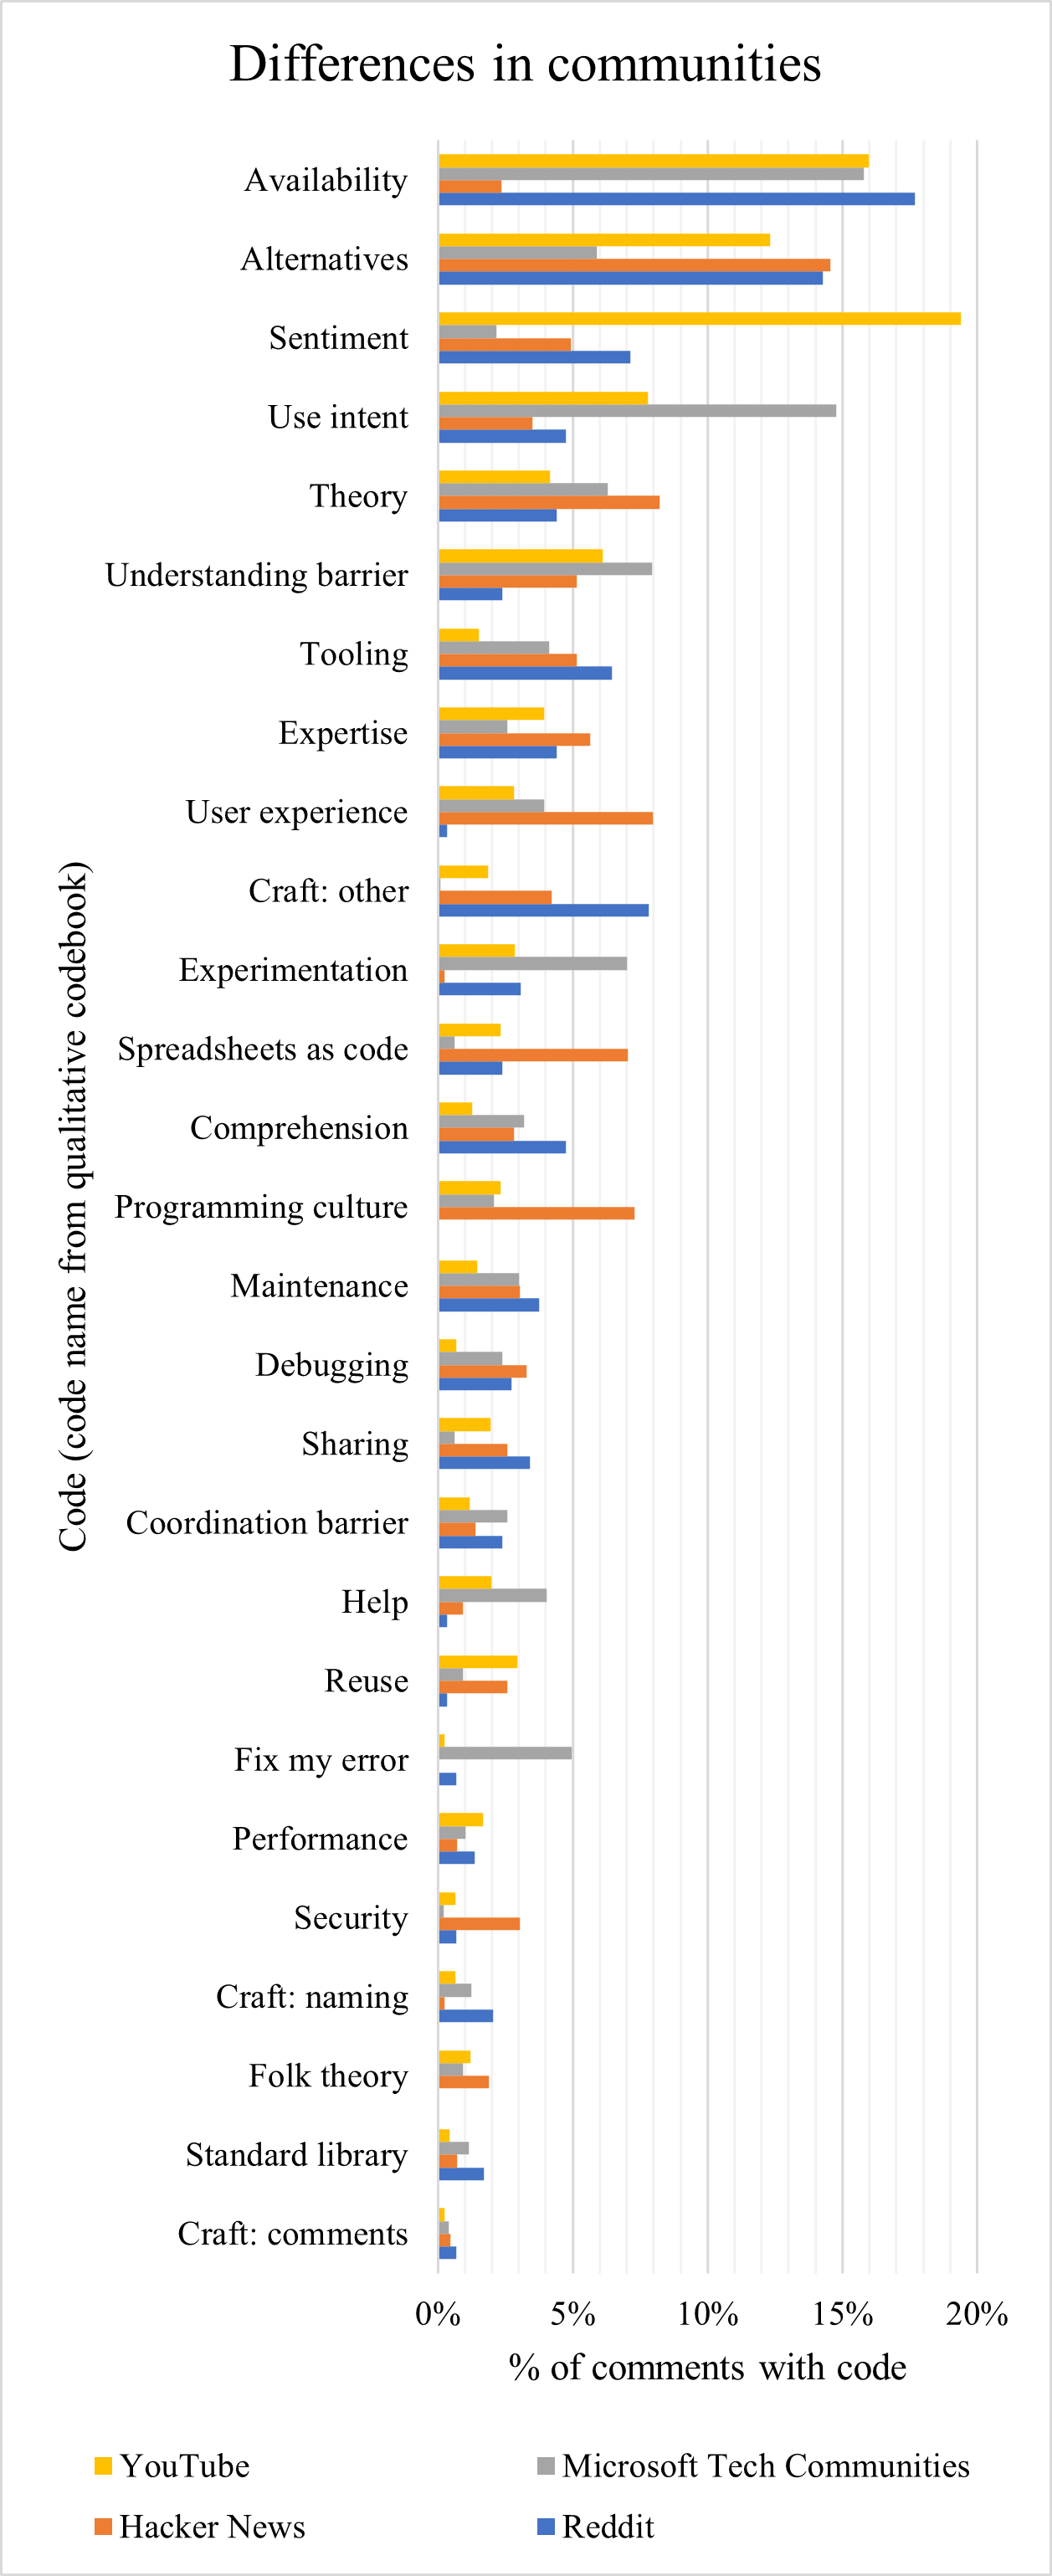 Relative frequencies of qualitative codes, compared between different online communities.